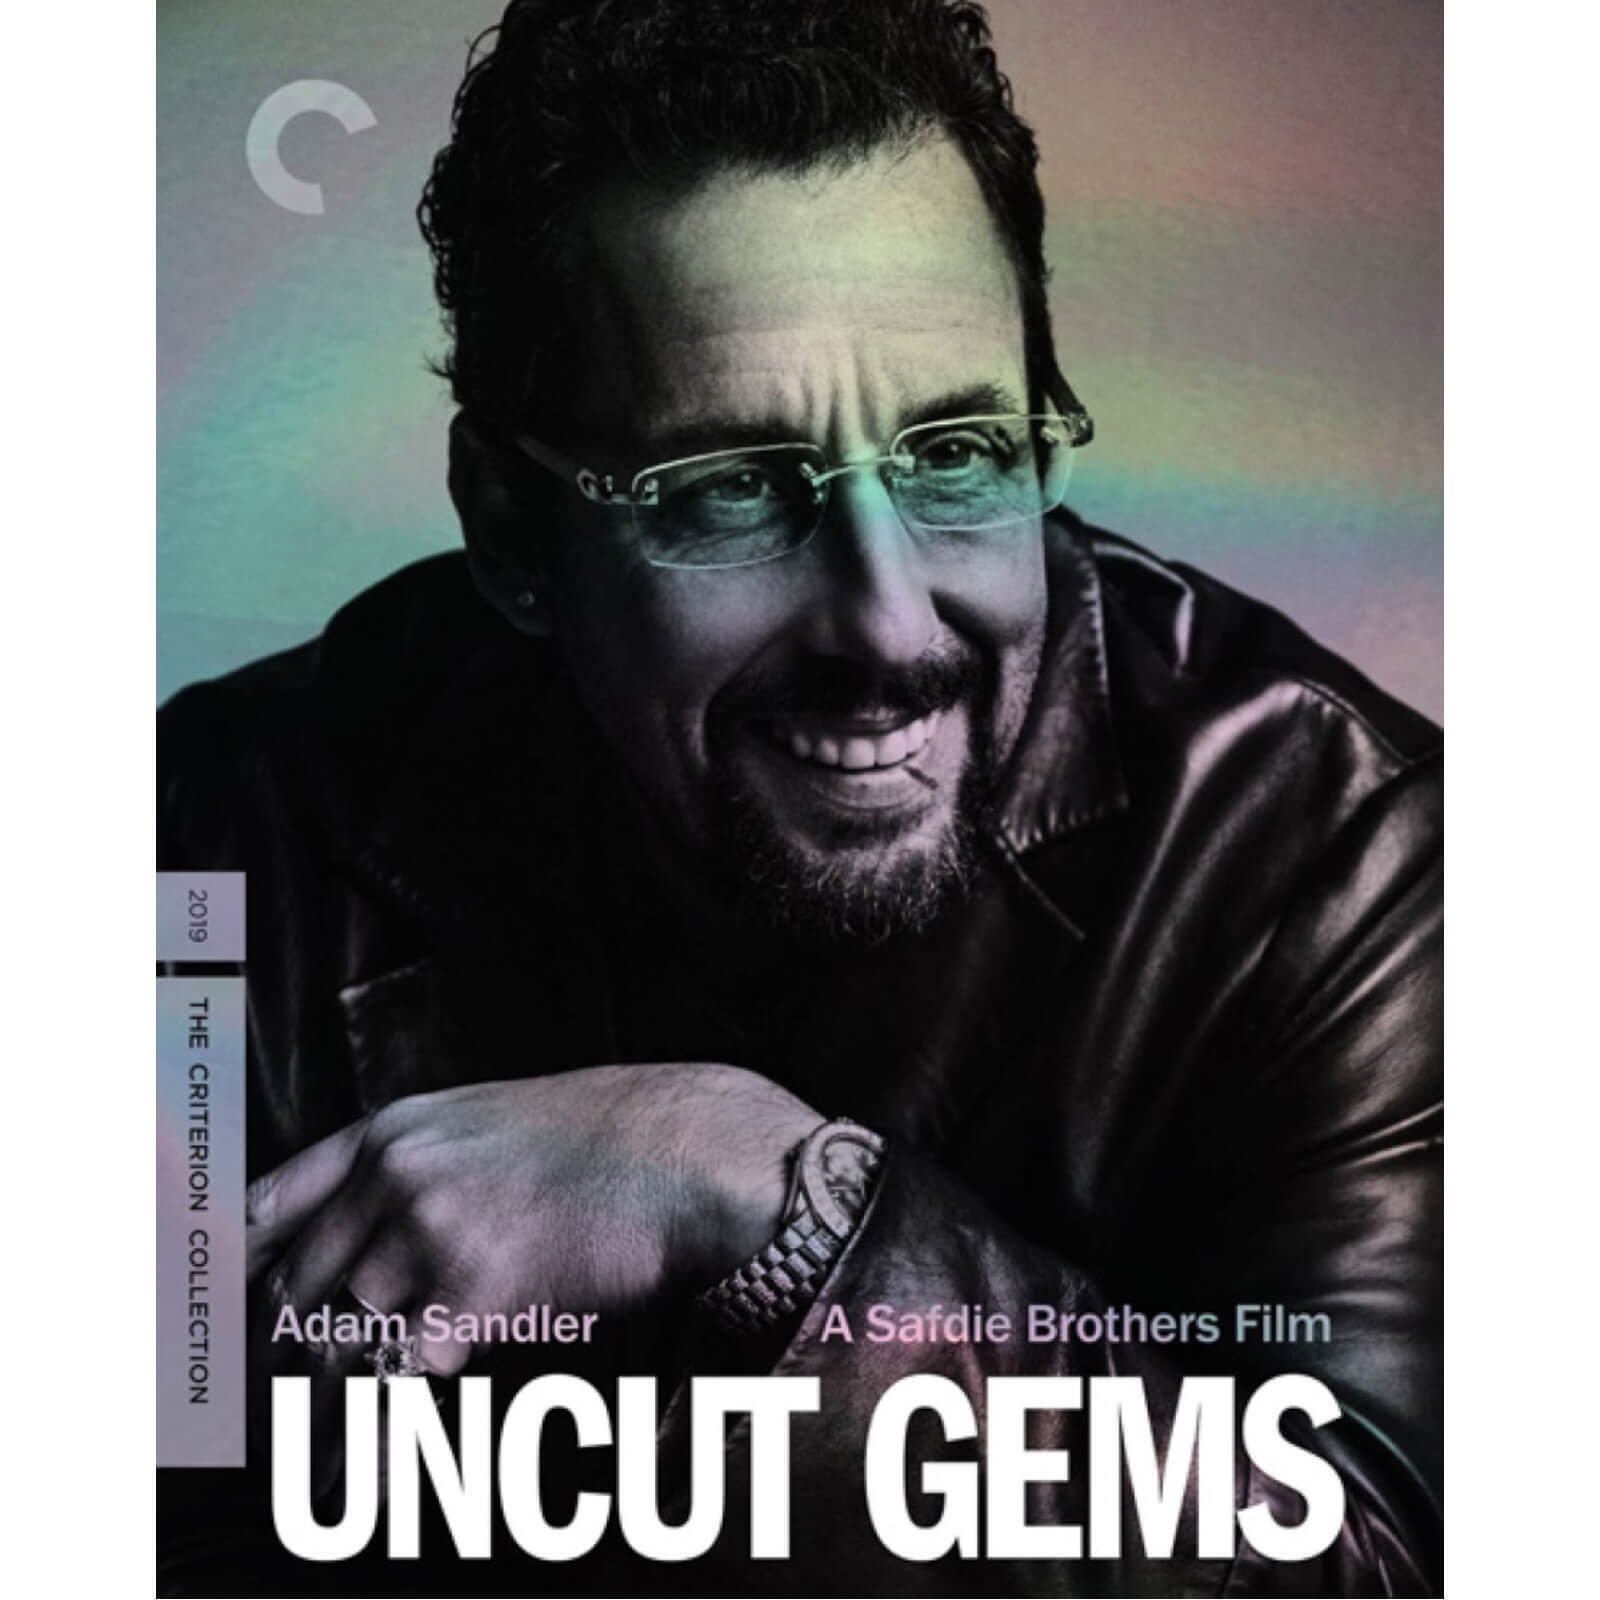 Uncut Gems - the Criterion Collection 4K Ultra HD (Includes Blu-ray)